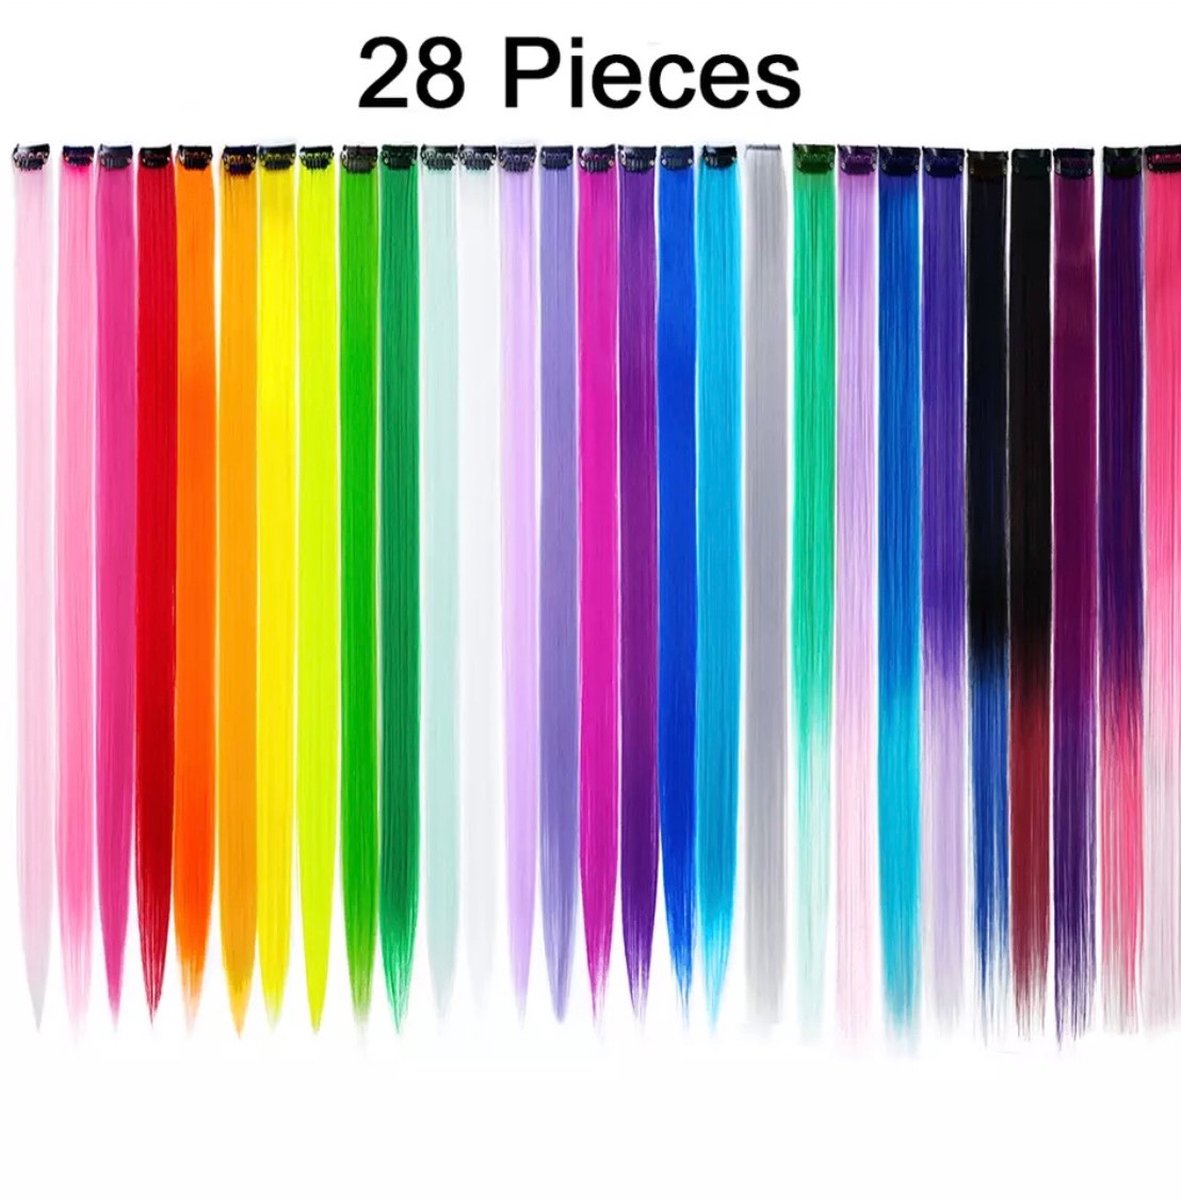 28x Hairextension Mix Color - 28 x haar extensions mix kleuren - Clip in haar - Haar extensions - Hairextensions - Clip in hair - carnaval - kunsthaar - Nephaar